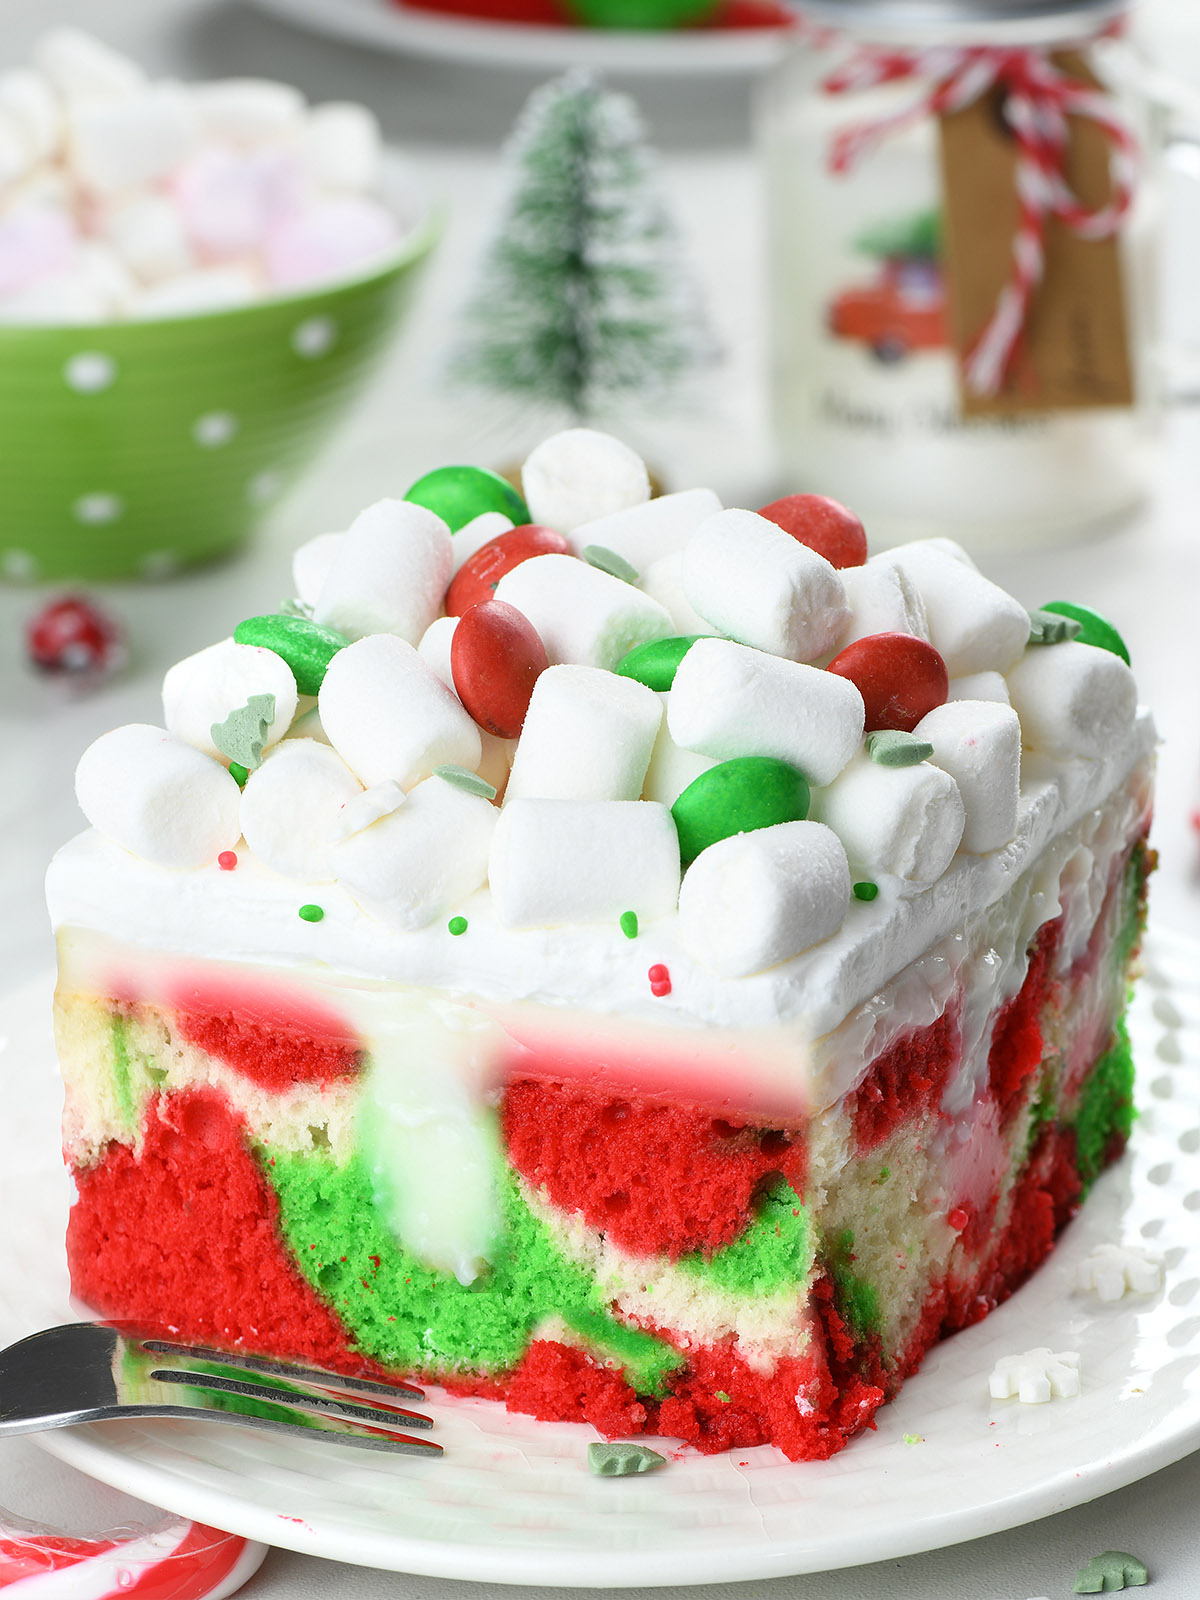 This festive Christmas Cake requires just a few simple ingredients: cake mix, instant pudding, whipped cream, and with a help of food coloring, it turns into a fun, and magical poke cake. 